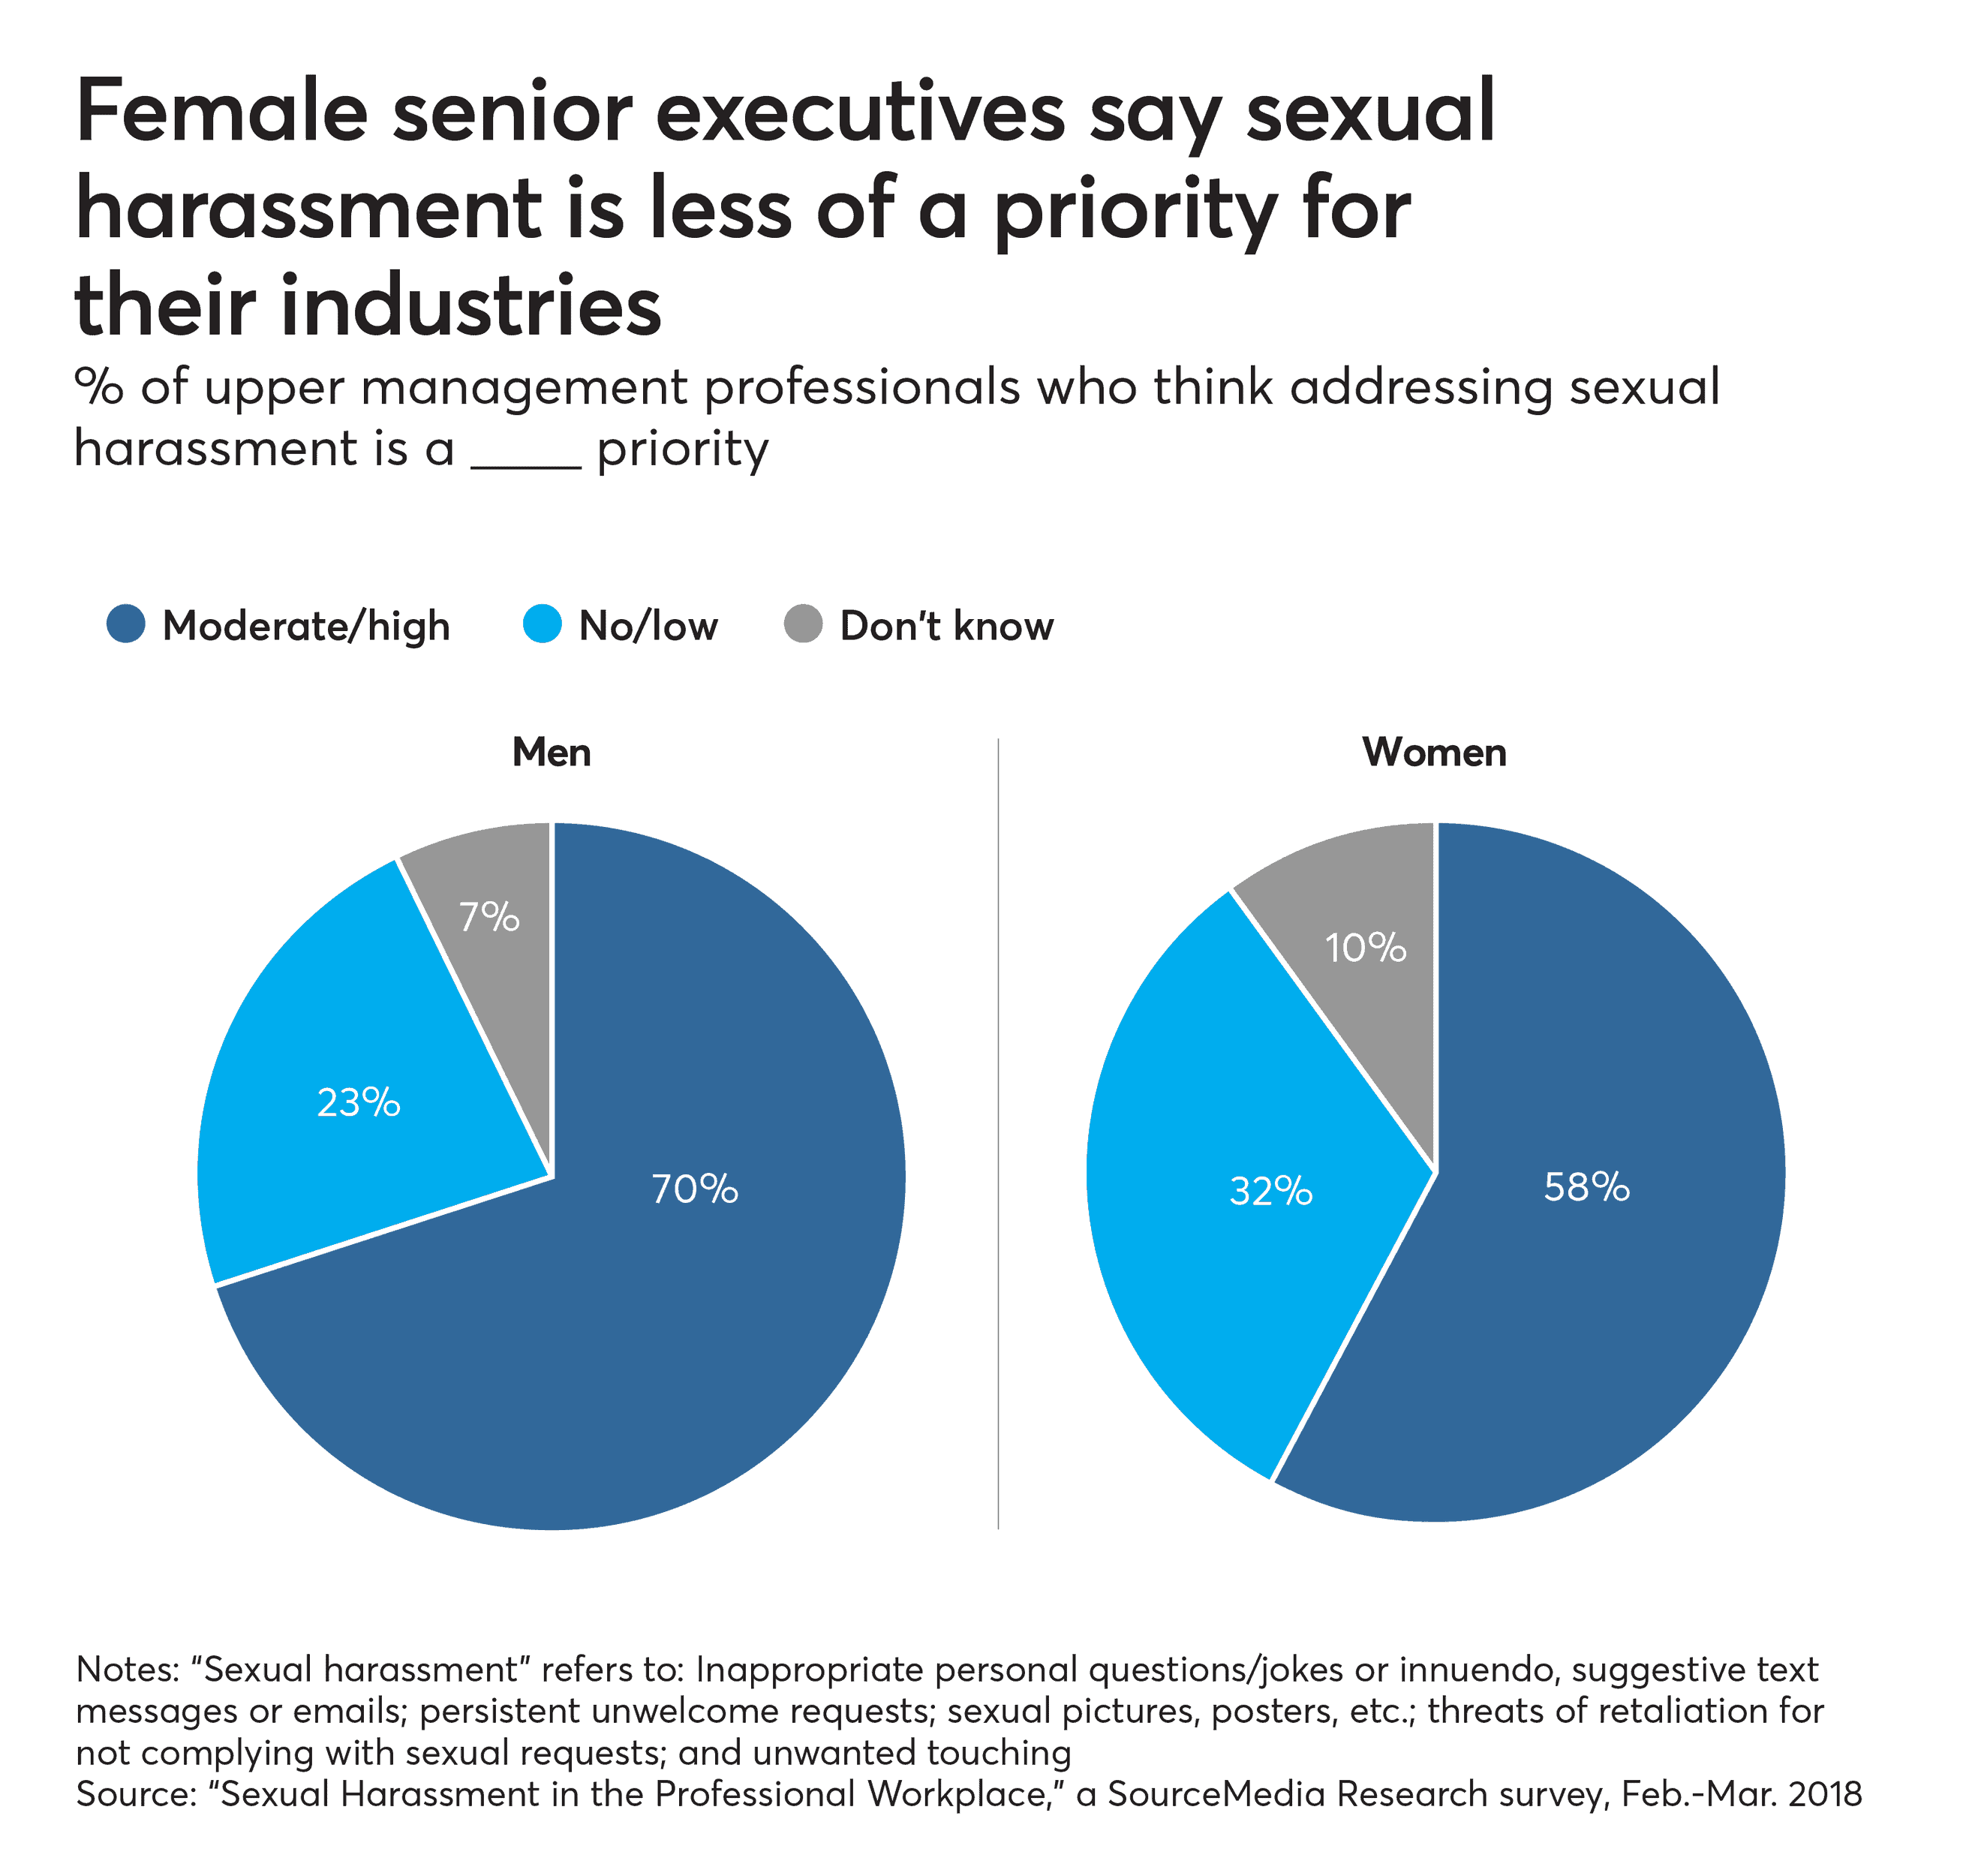 Executive women more likely to believe their industry views harassment as a low priority